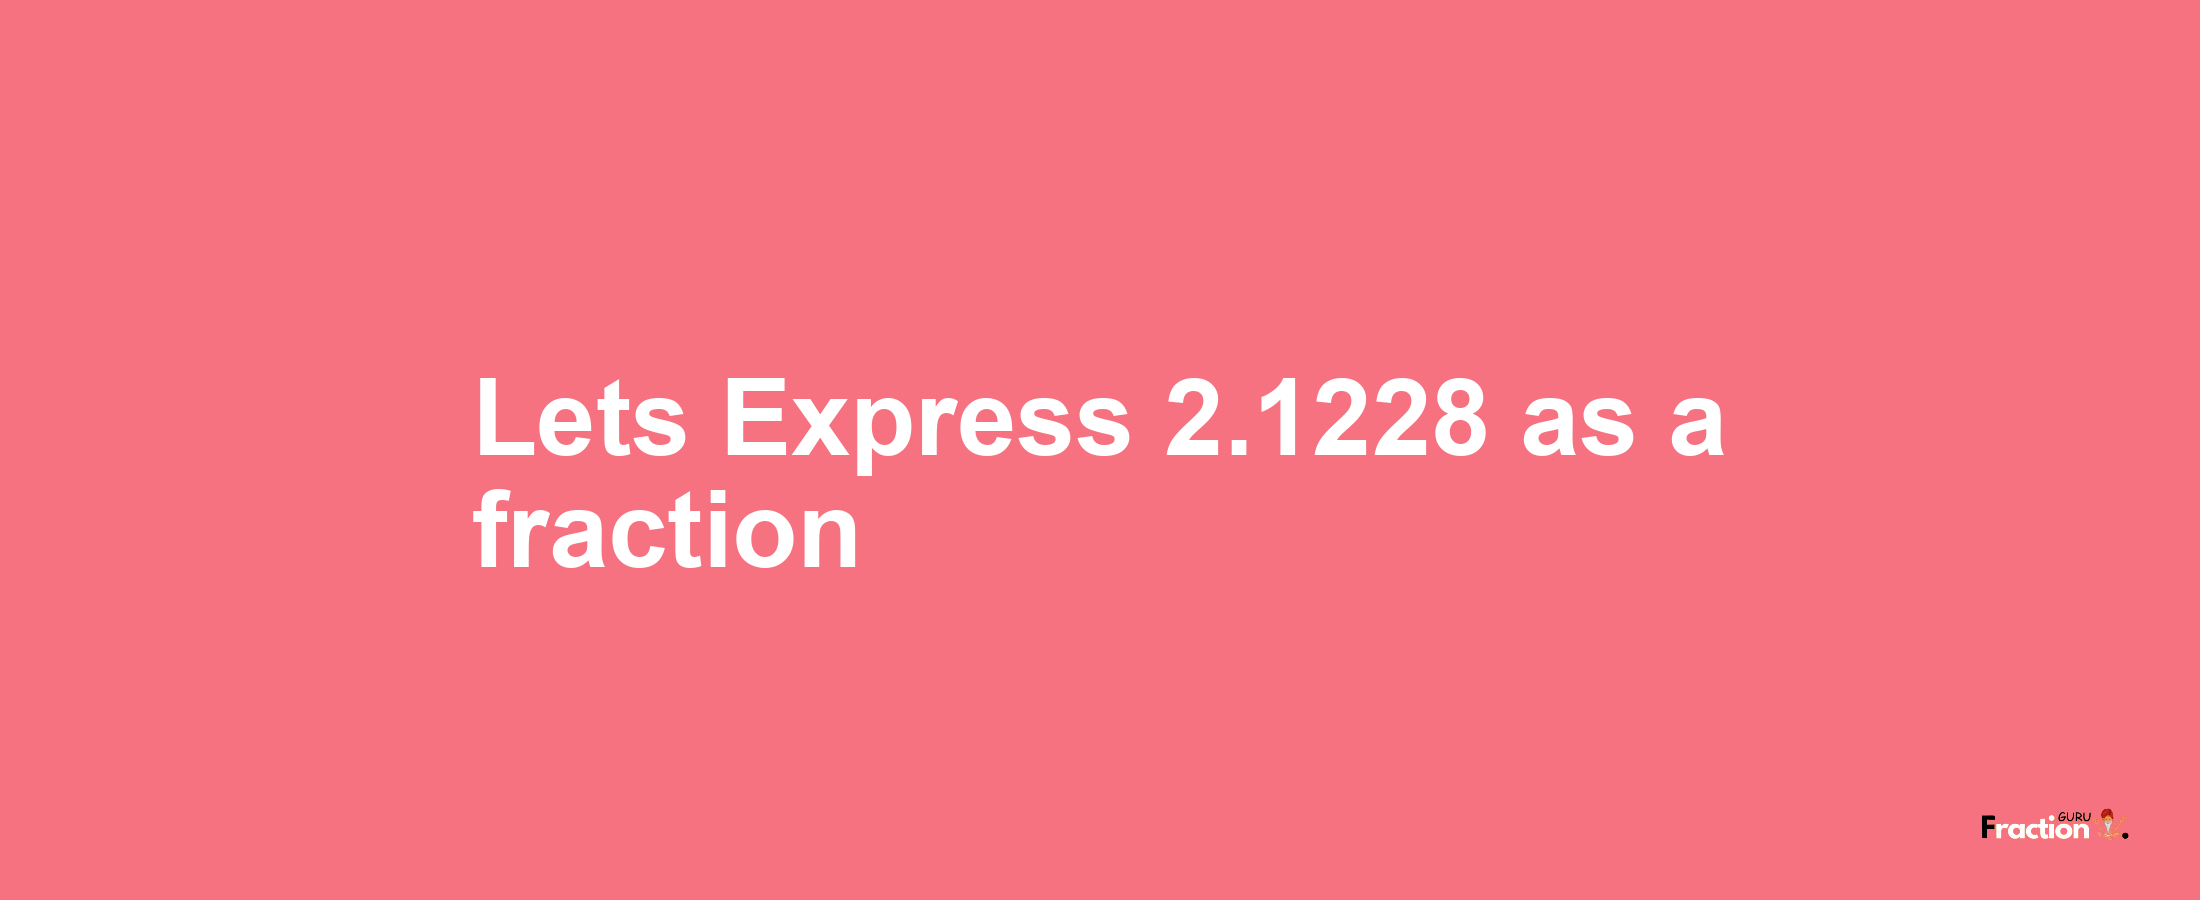 Lets Express 2.1228 as afraction